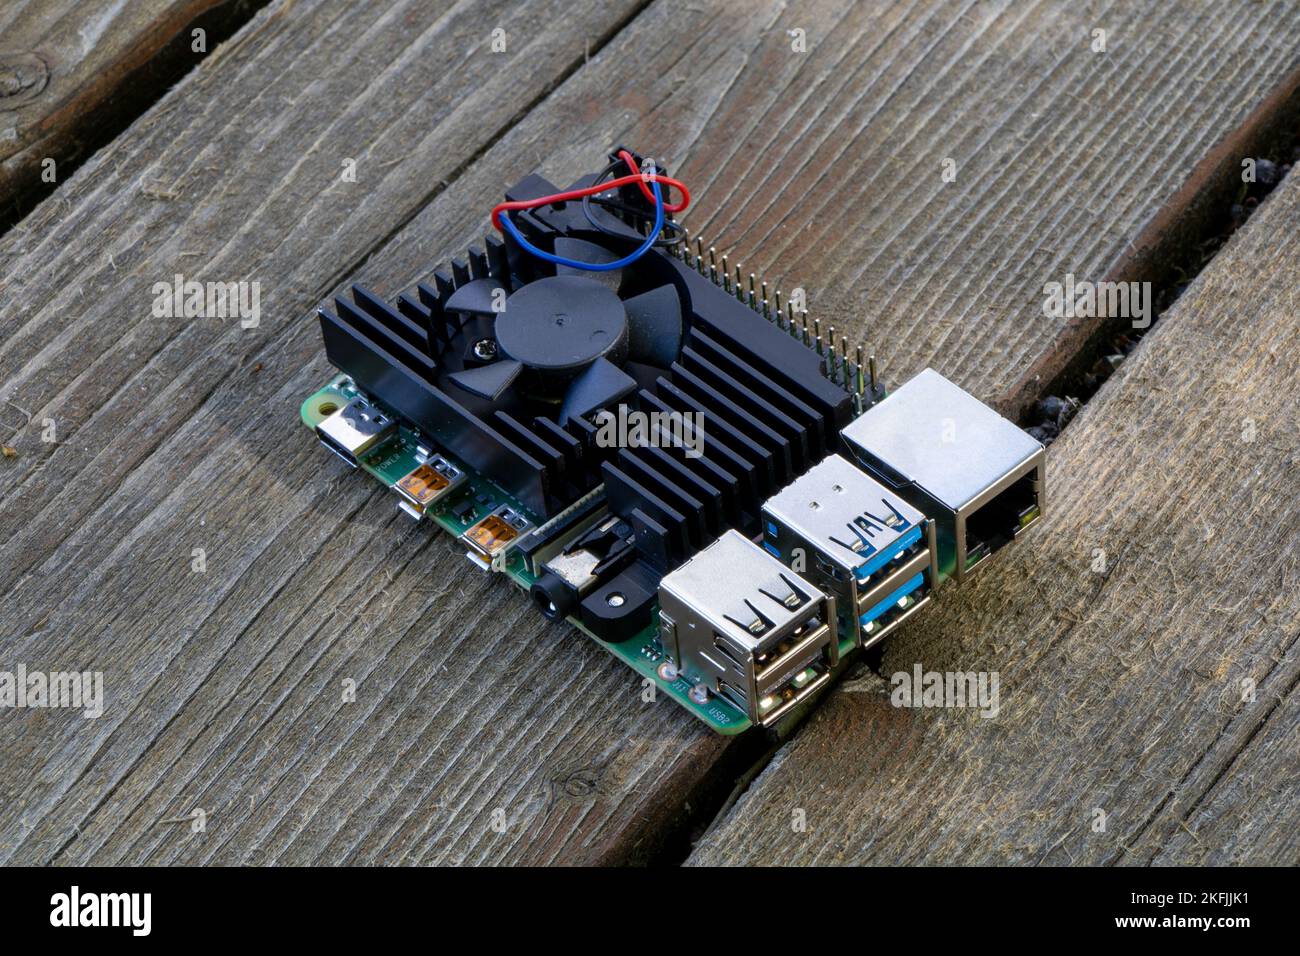 A close-up of a microcomputer for electrical engineering and programming prototyping on wood surface Stock Photo